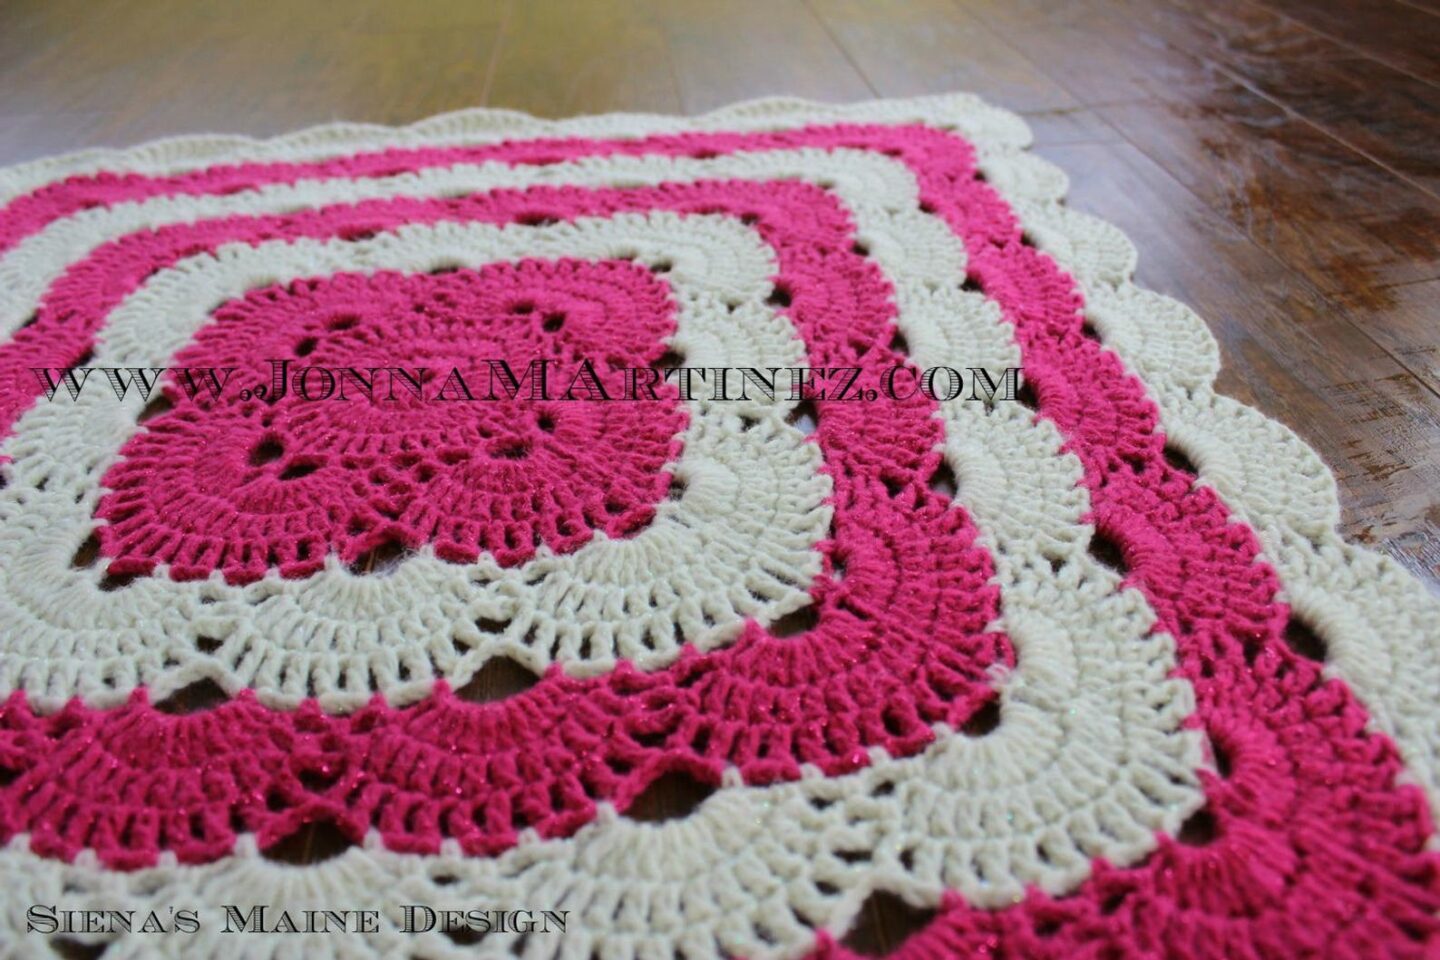 Crochet patterns that look great with self striping yarn! 